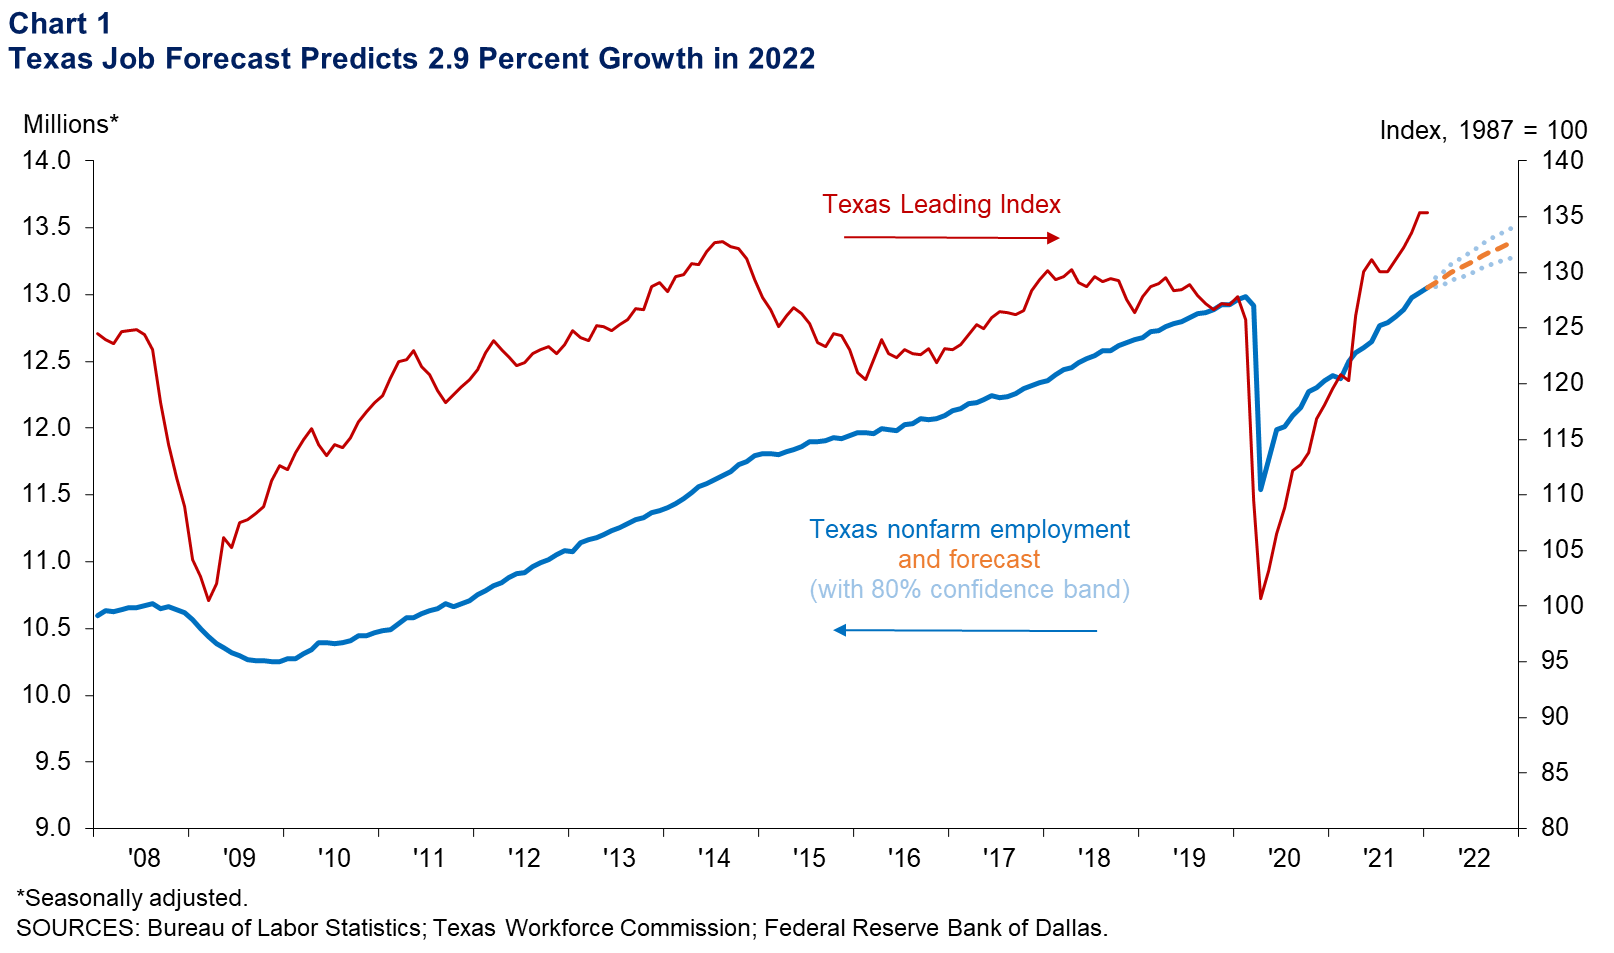 Texas Job Forecast Predicts 2.9 Percent Growth in 20212